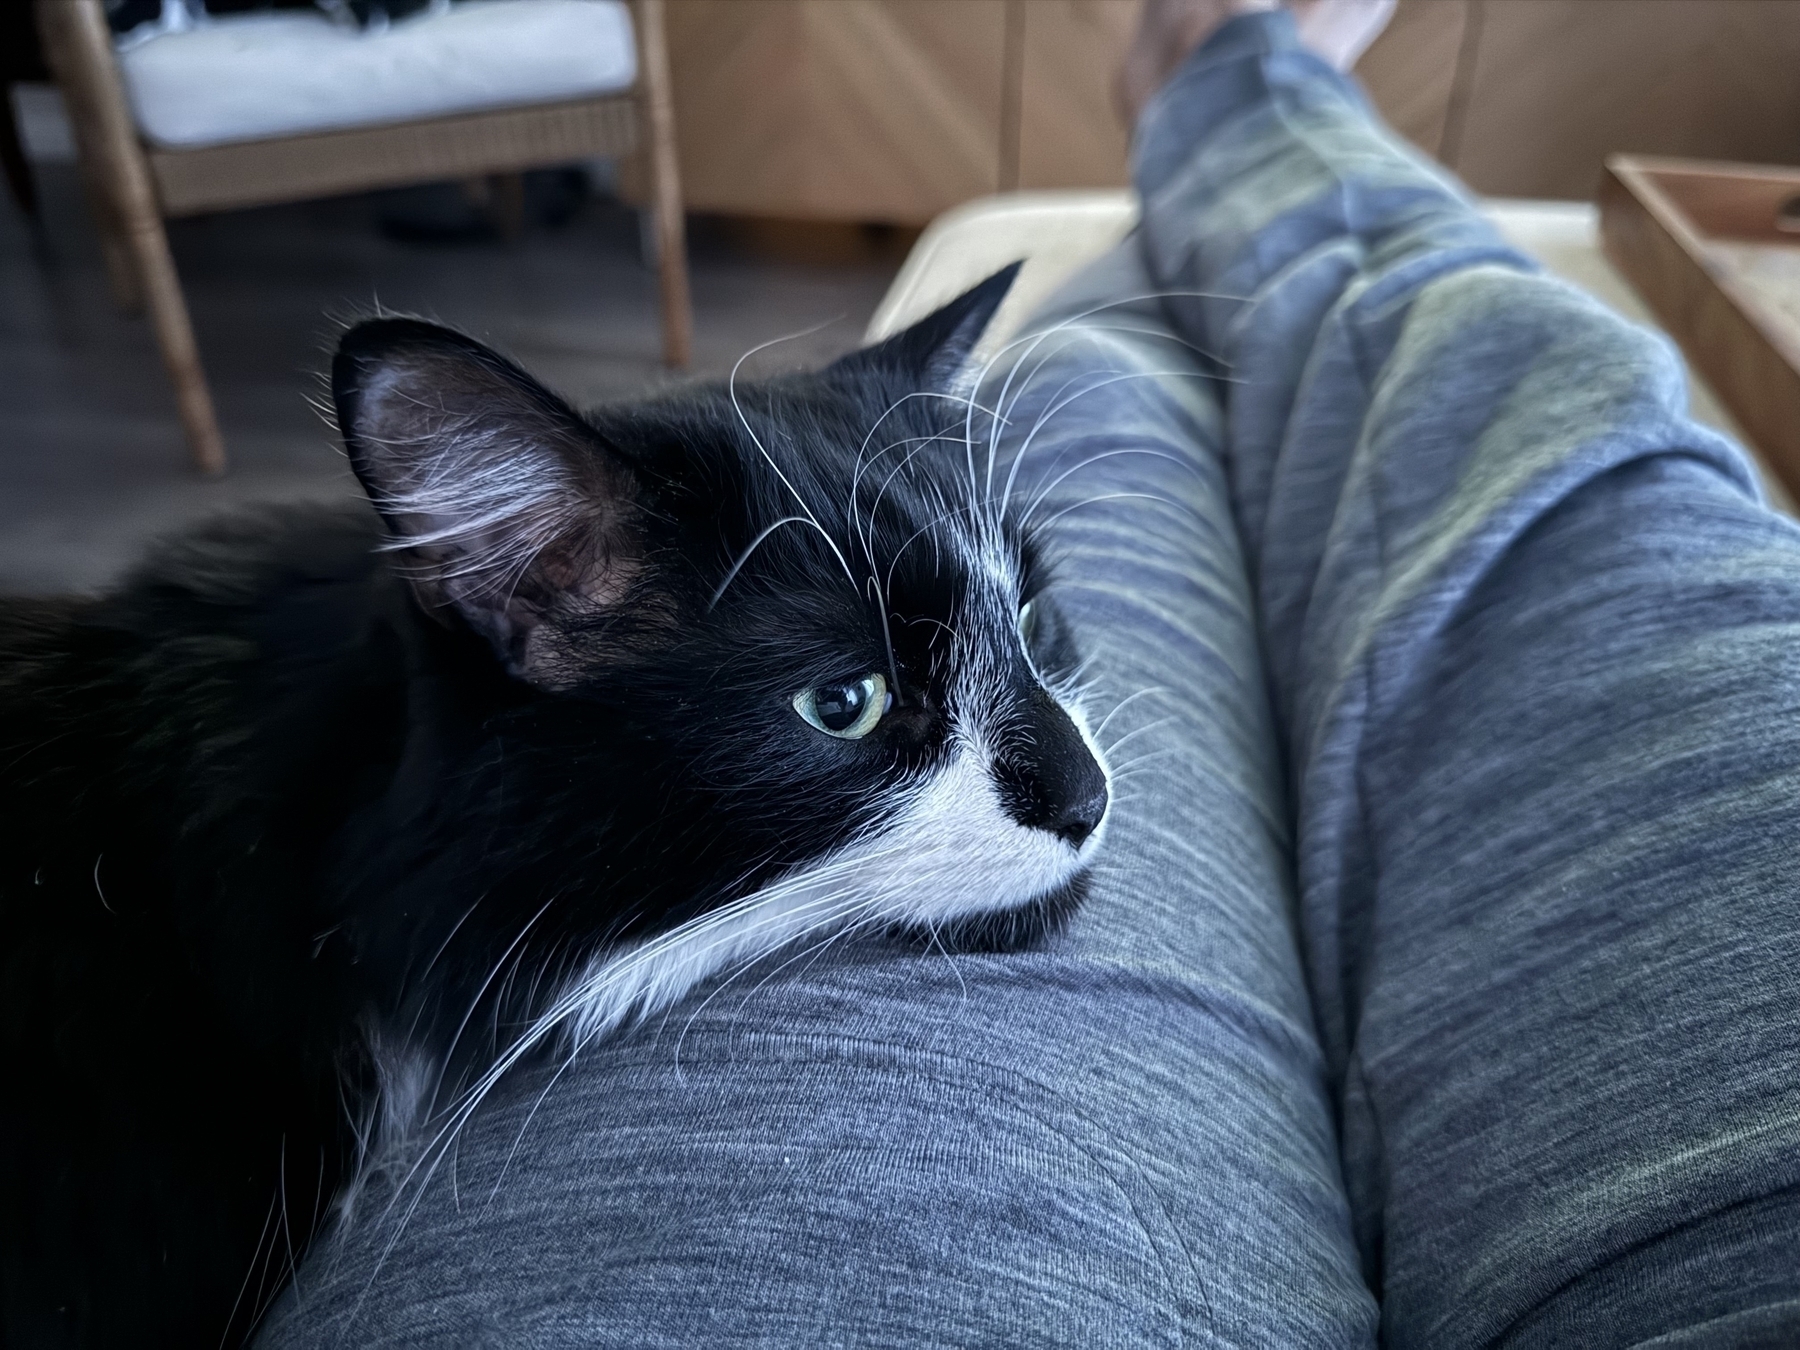 A black and white tuxedo cat rests his chin on an extended leg. The photo is taken by the person seated on a couch, legs up on an ottoman. The general mood is tranquil.